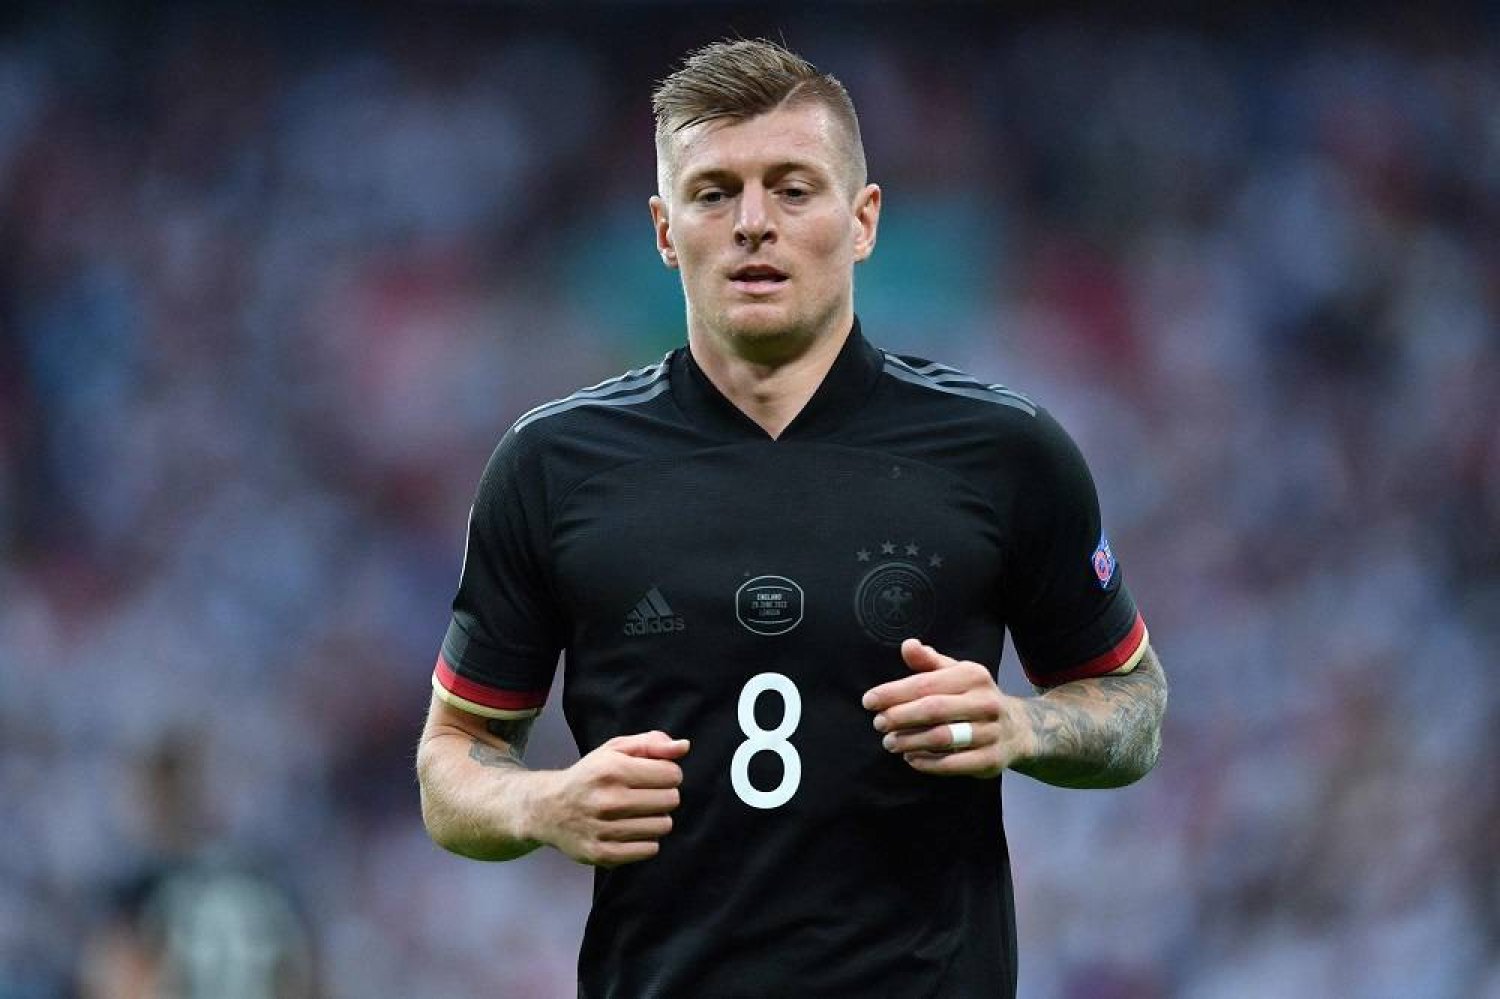 Germany's midfielder Toni Kroos jogs during the UEFA Euro 2020 round of 16 football match between England and Germany at Wembley Stadium in London on June 29, 2021. (AFP)